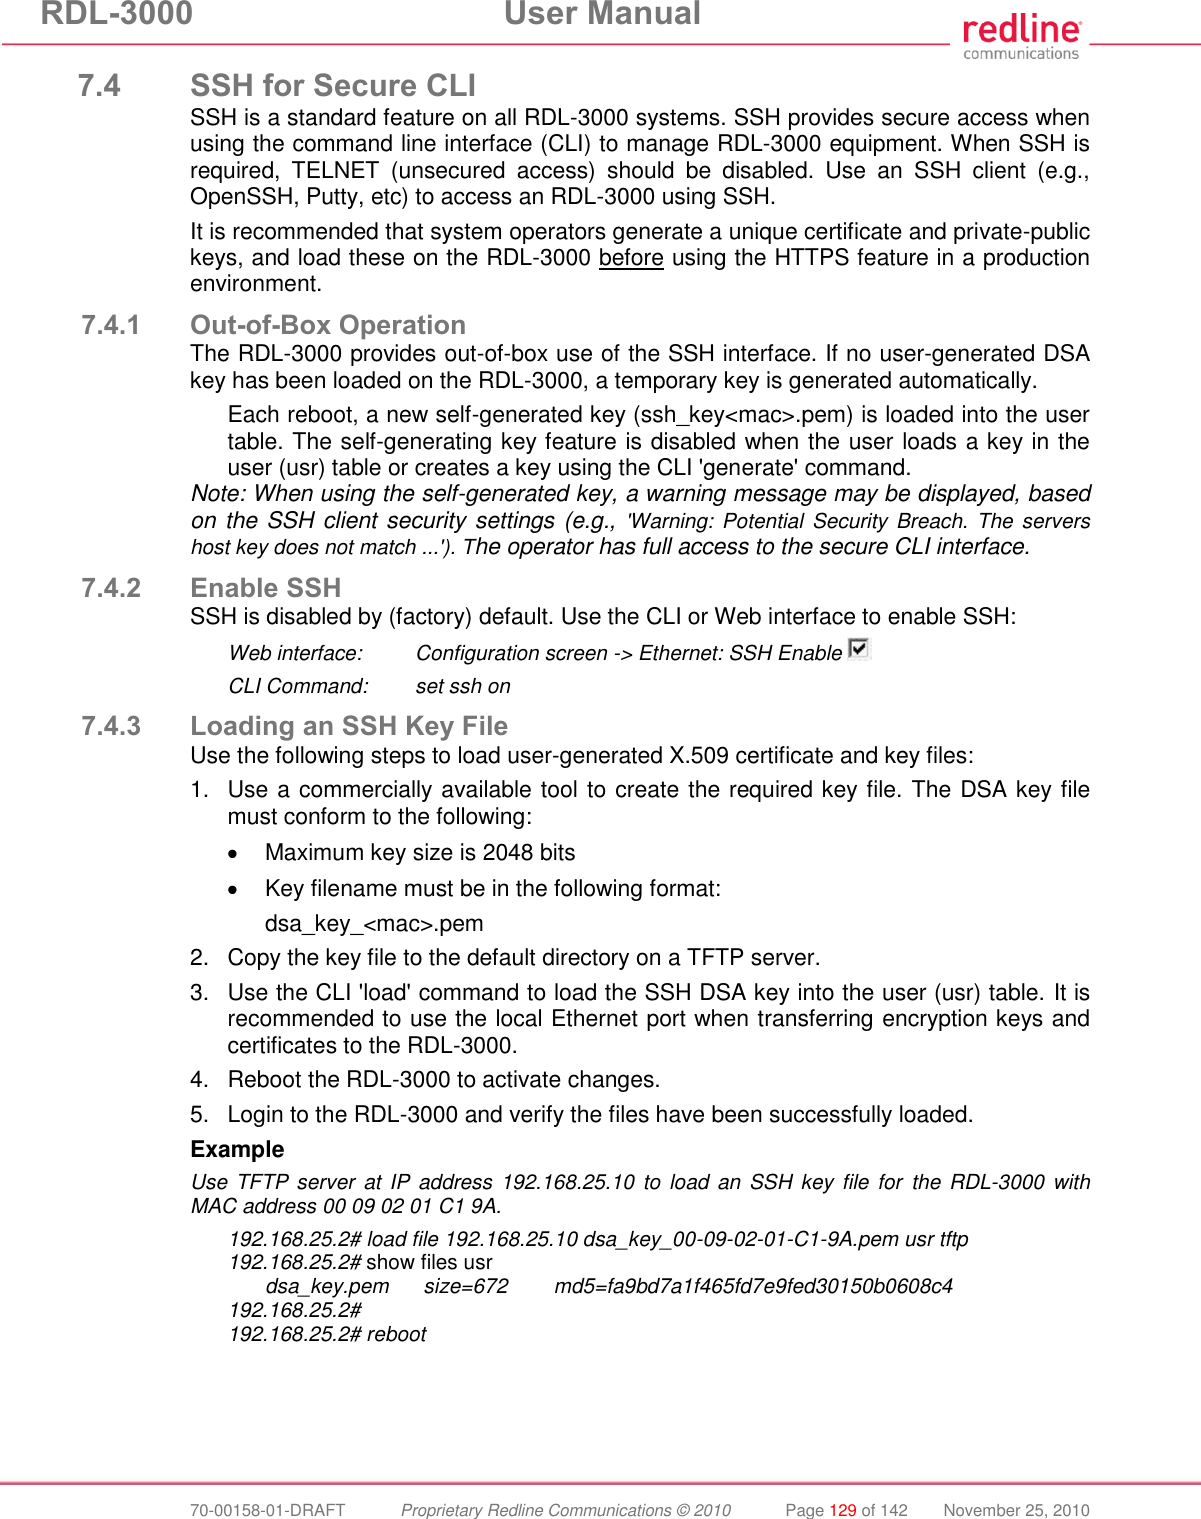 RDL-3000  User Manual  70-00158-01-DRAFT  Proprietary Redline Communications © 2010  Page 129 of 142  November 25, 2010 7.4 SSH for Secure CLI SSH is a standard feature on all RDL-3000 systems. SSH provides secure access when using the command line interface (CLI) to manage RDL-3000 equipment. When SSH is required,  TELNET  (unsecured  access)  should  be  disabled.  Use  an  SSH  client  (e.g., OpenSSH, Putty, etc) to access an RDL-3000 using SSH. It is recommended that system operators generate a unique certificate and private-public keys, and load these on the RDL-3000 before using the HTTPS feature in a production environment. 7.4.1 Out-of-Box Operation The RDL-3000 provides out-of-box use of the SSH interface. If no user-generated DSA key has been loaded on the RDL-3000, a temporary key is generated automatically. Each reboot, a new self-generated key (ssh_key&lt;mac&gt;.pem) is loaded into the user table. The self-generating key feature is disabled when the user loads a key in the user (usr) table or creates a key using the CLI &apos;generate&apos; command. Note: When using the self-generated key, a warning message may be displayed, based on the SSH client security settings (e.g., &apos;Warning:  Potential  Security  Breach.  The  servers host key does not match ...&apos;). The operator has full access to the secure CLI interface. 7.4.2 Enable SSH SSH is disabled by (factory) default. Use the CLI or Web interface to enable SSH: Web interface:  Configuration screen -&gt; Ethernet: SSH Enable   CLI Command:  set ssh on 7.4.3 Loading an SSH Key File Use the following steps to load user-generated X.509 certificate and key files: 1.  Use a commercially available tool to create the required key file. The DSA key file must conform to the following:   Maximum key size is 2048 bits  Key filename must be in the following format: dsa_key_&lt;mac&gt;.pem 2.  Copy the key file to the default directory on a TFTP server. 3.  Use the CLI &apos;load&apos; command to load the SSH DSA key into the user (usr) table. It is recommended to use the local Ethernet port when transferring encryption keys and certificates to the RDL-3000. 4.  Reboot the RDL-3000 to activate changes. 5.  Login to the RDL-3000 and verify the files have been successfully loaded. Example Use TFTP  server  at IP address 192.168.25.10 to load  an  SSH key file  for  the  RDL-3000  with MAC address 00 09 02 01 C1 9A. 192.168.25.2# load file 192.168.25.10 dsa_key_00-09-02-01-C1-9A.pem usr tftp 192.168.25.2# show files usr   dsa_key.pem      size=672        md5=fa9bd7a1f465fd7e9fed30150b0608c4 192.168.25.2# 192.168.25.2# reboot 